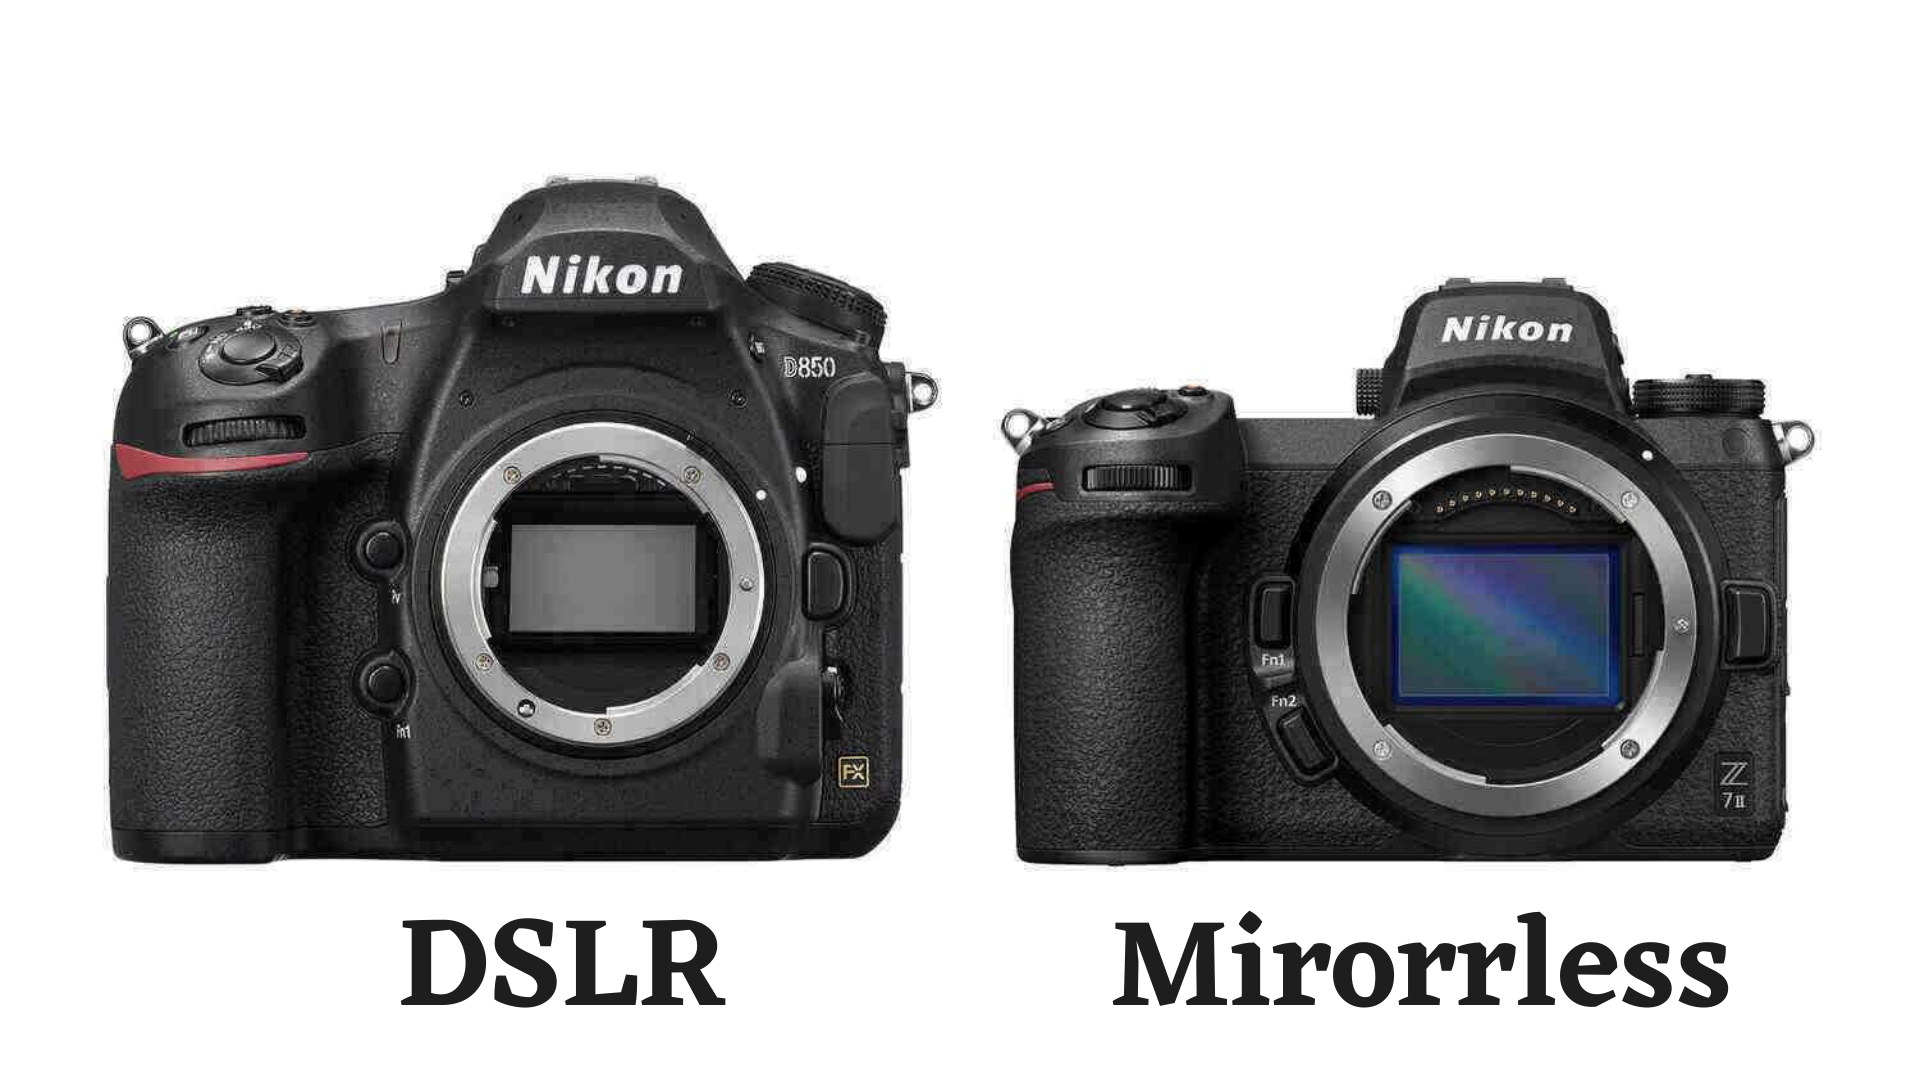 DSLR vs Mirrorless Cameras: Which one is the right choice for you?